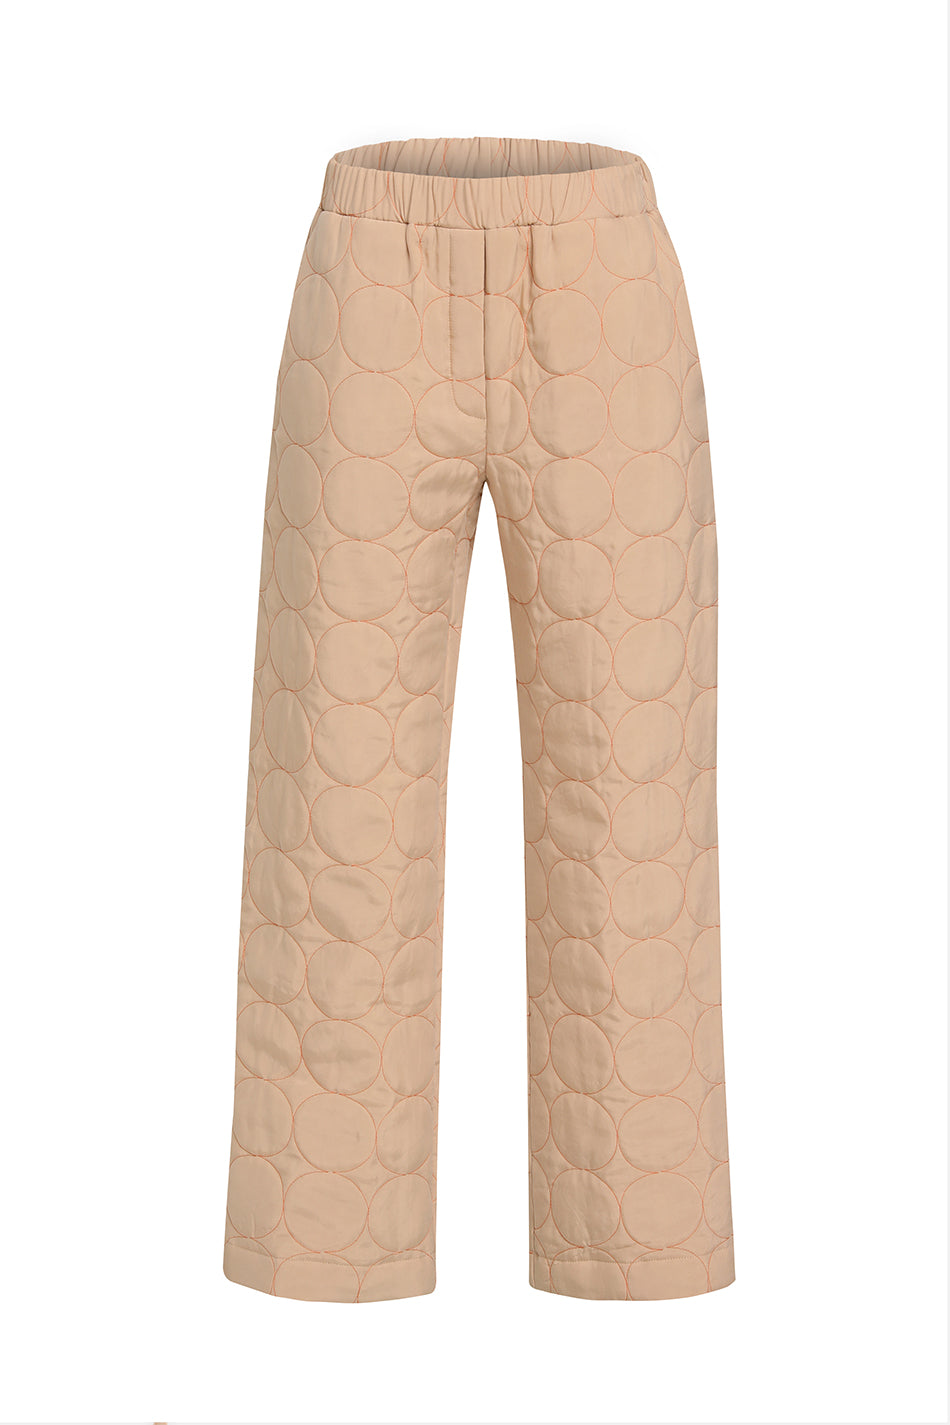 SATSUMA QUILTED PANTS